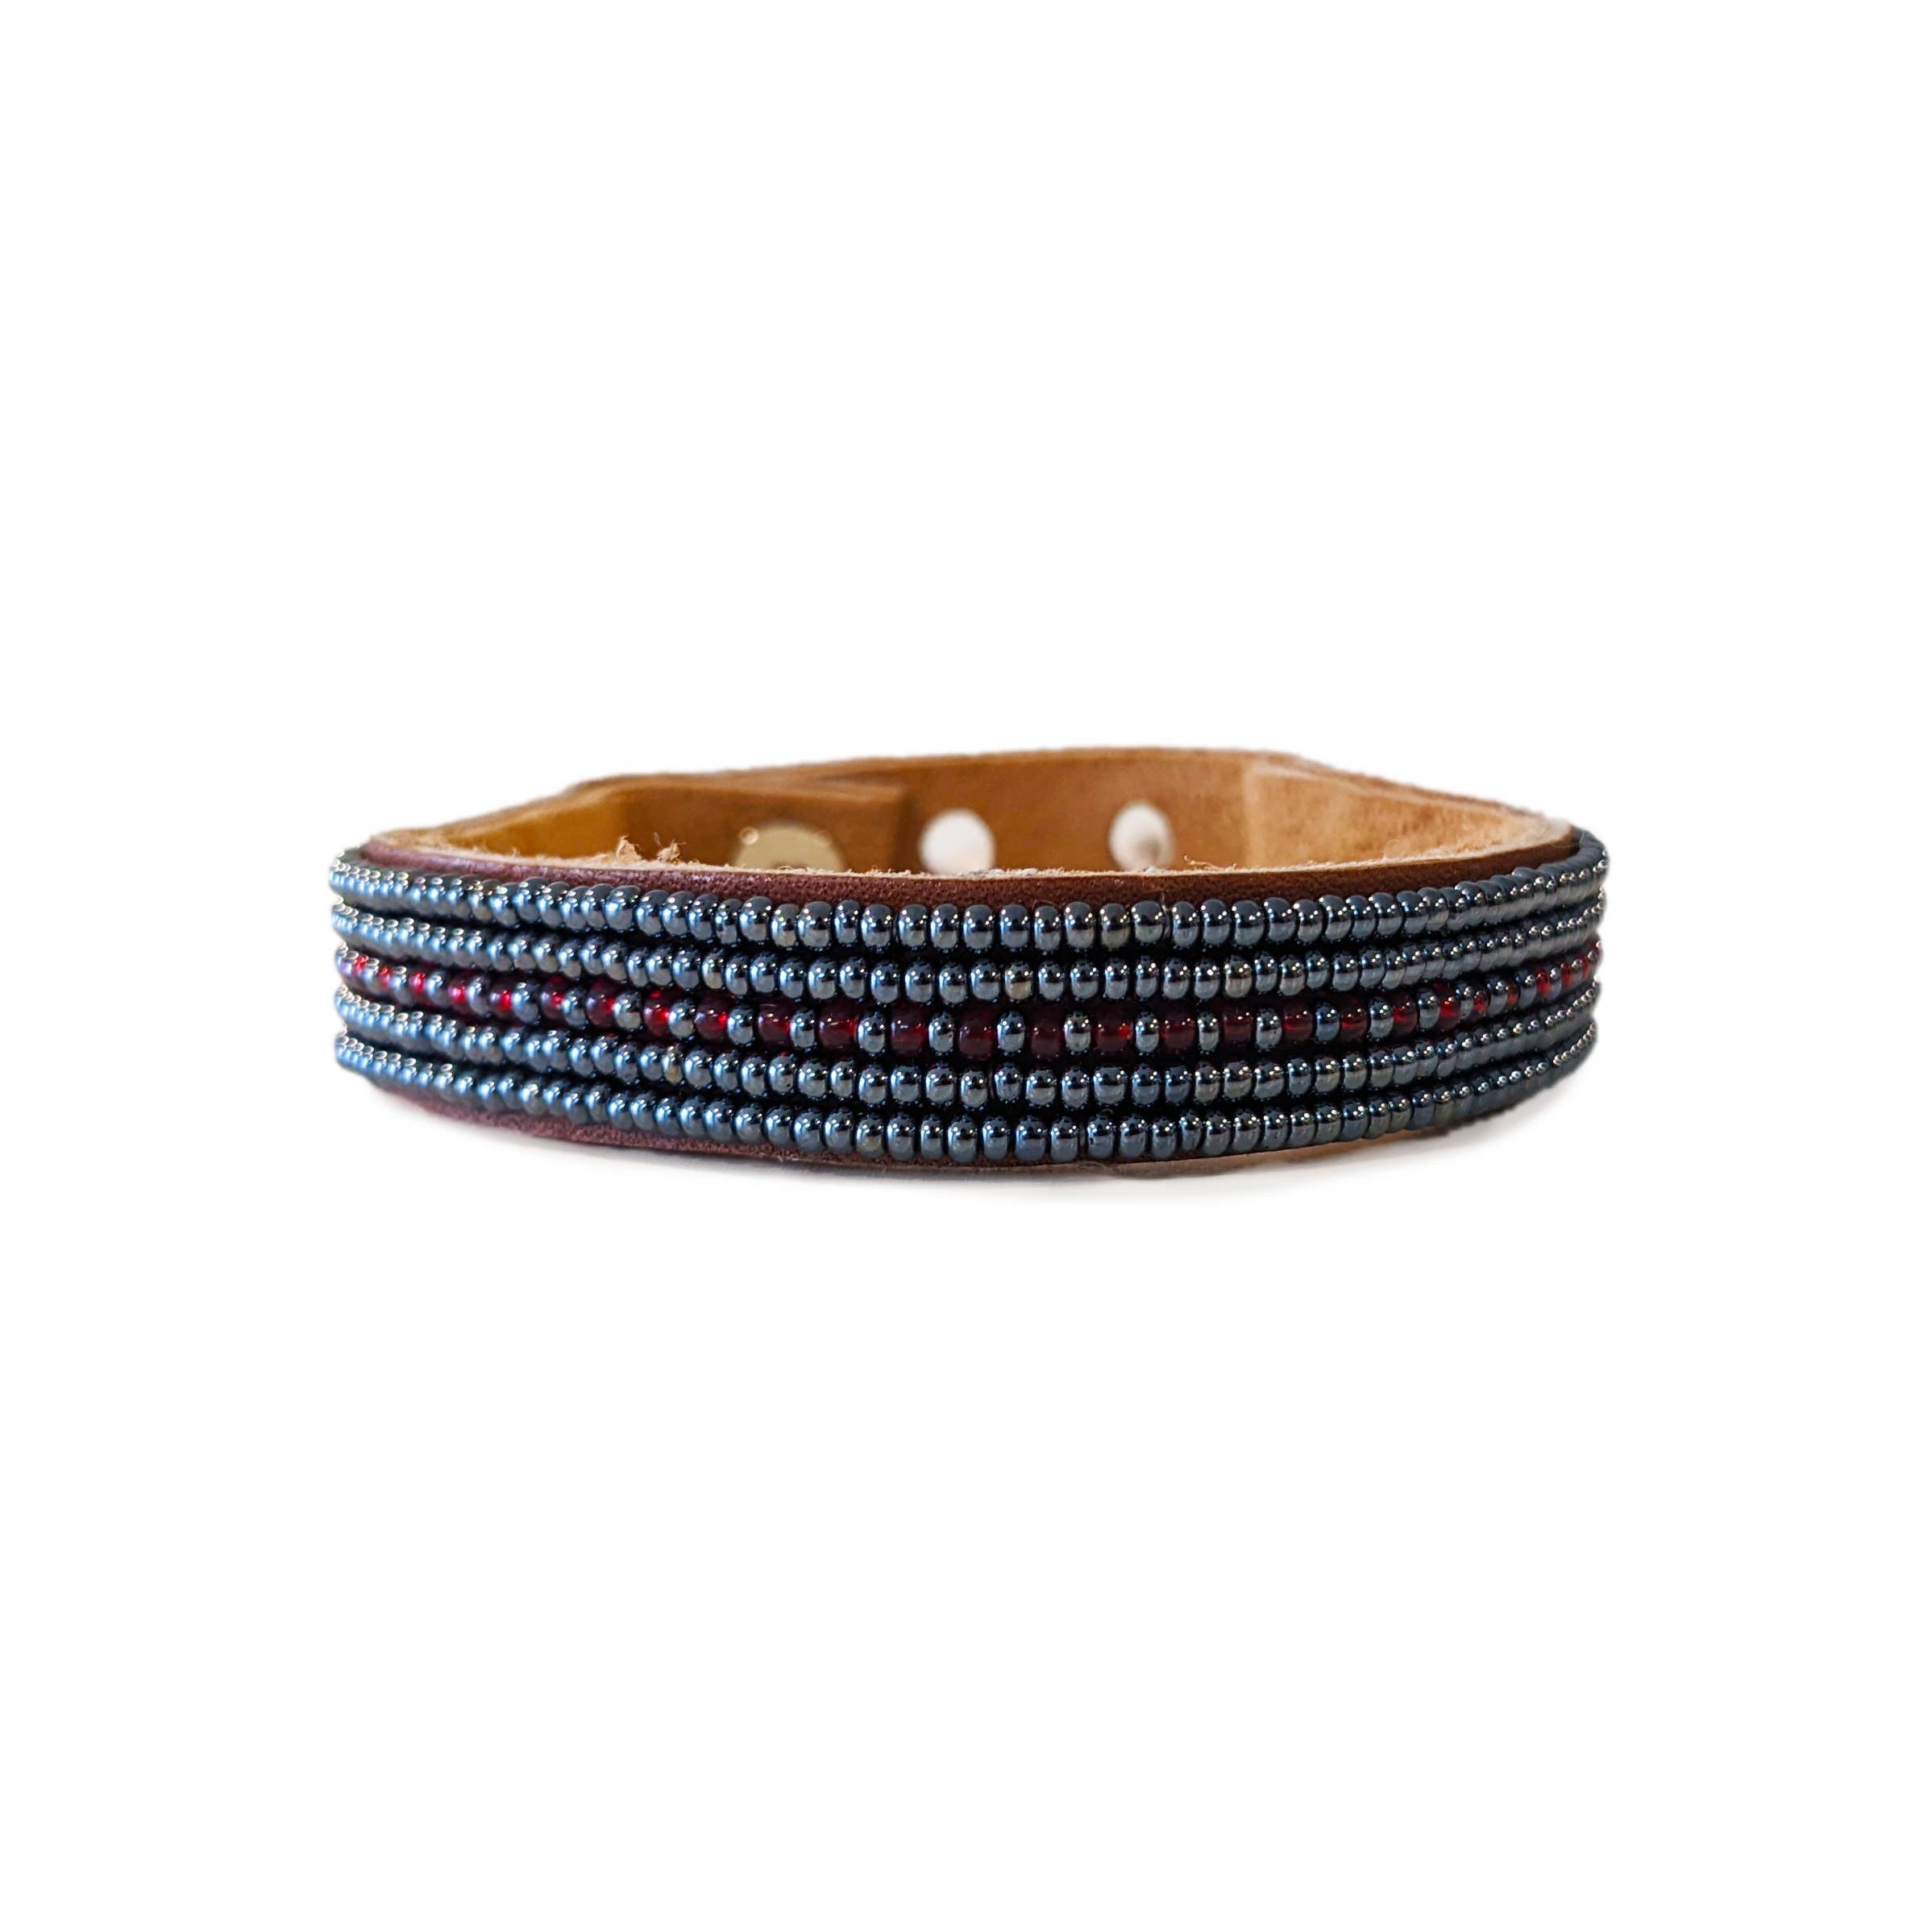 Dashes Garnet and Slate Beaded Leather Cuff- Assorted Sizes